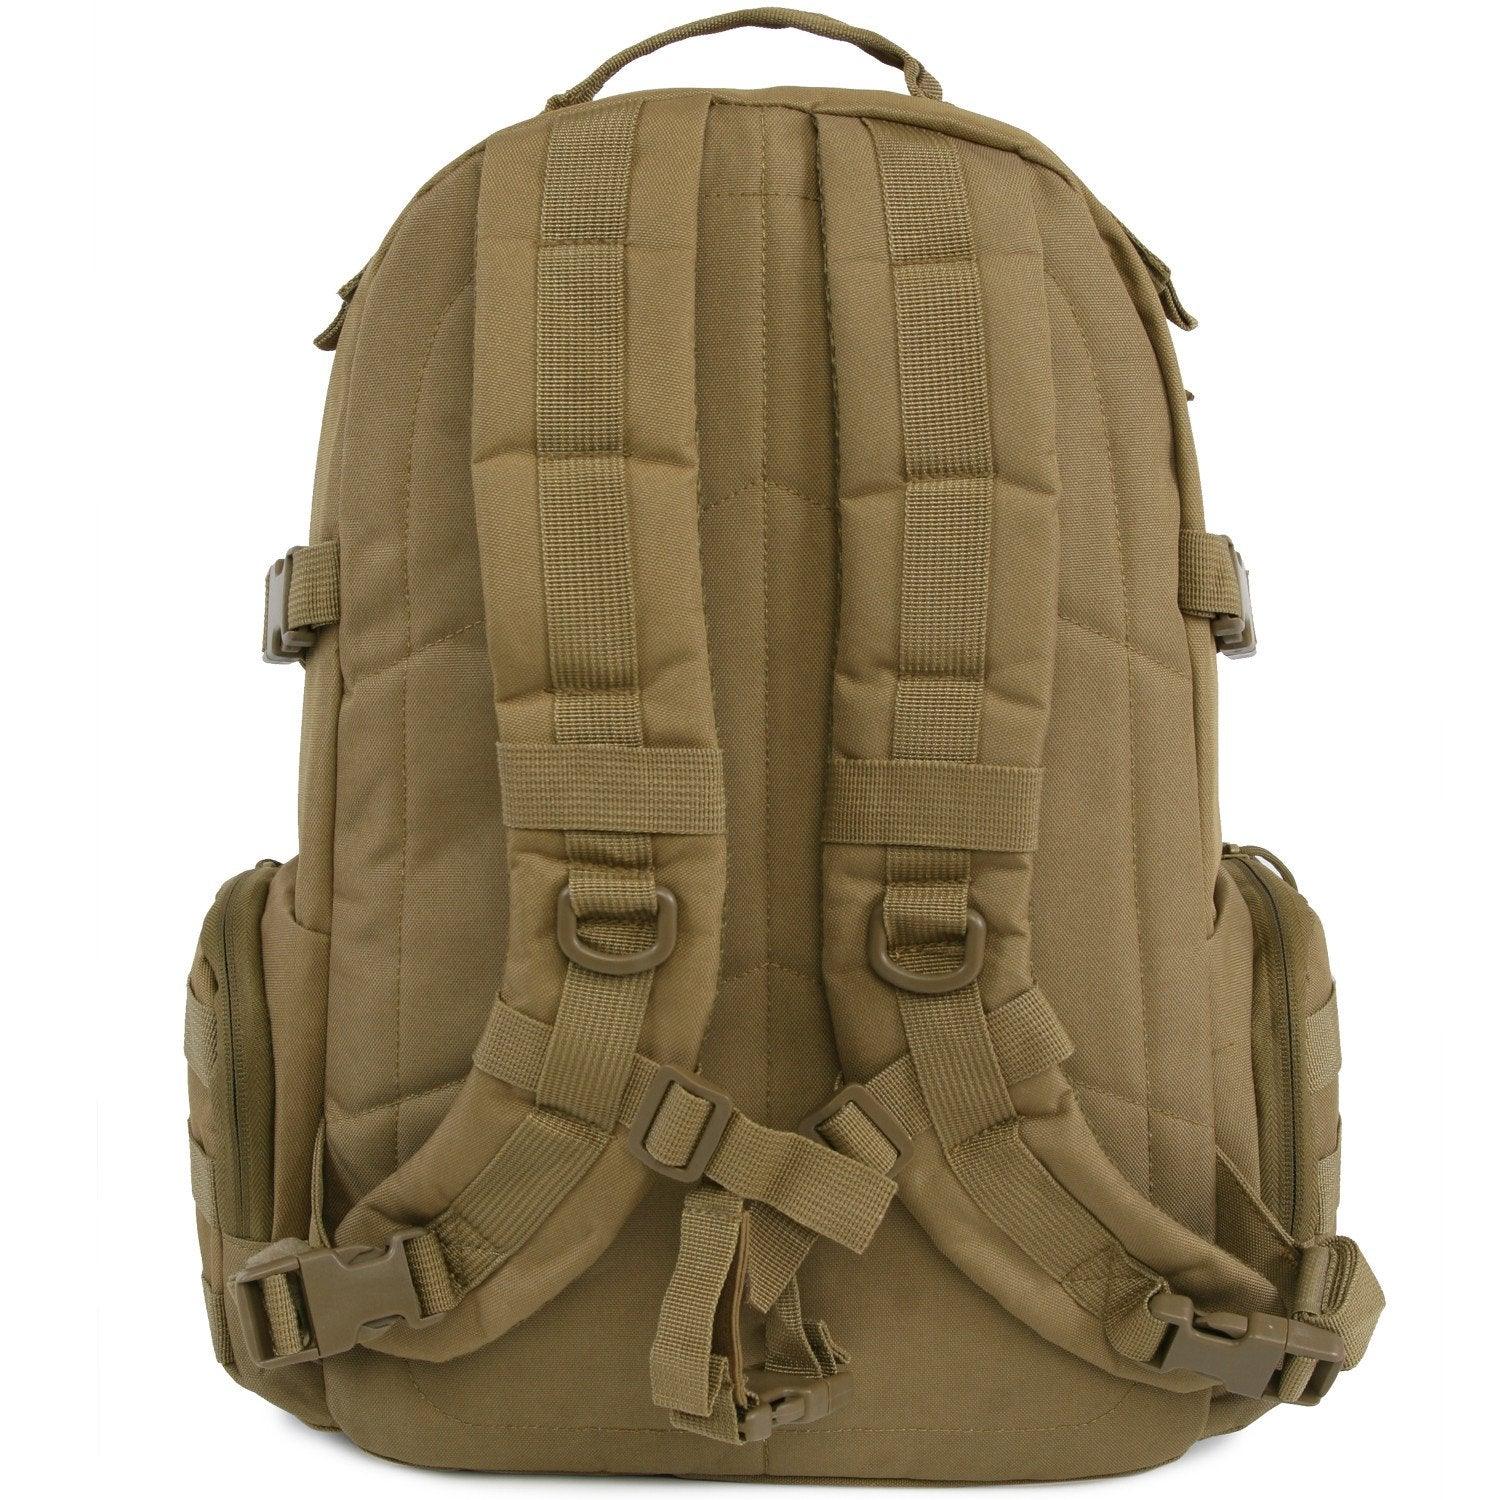 Crusher 2 Day Backpack | Durable Tactical Pack | Police & Outdoor